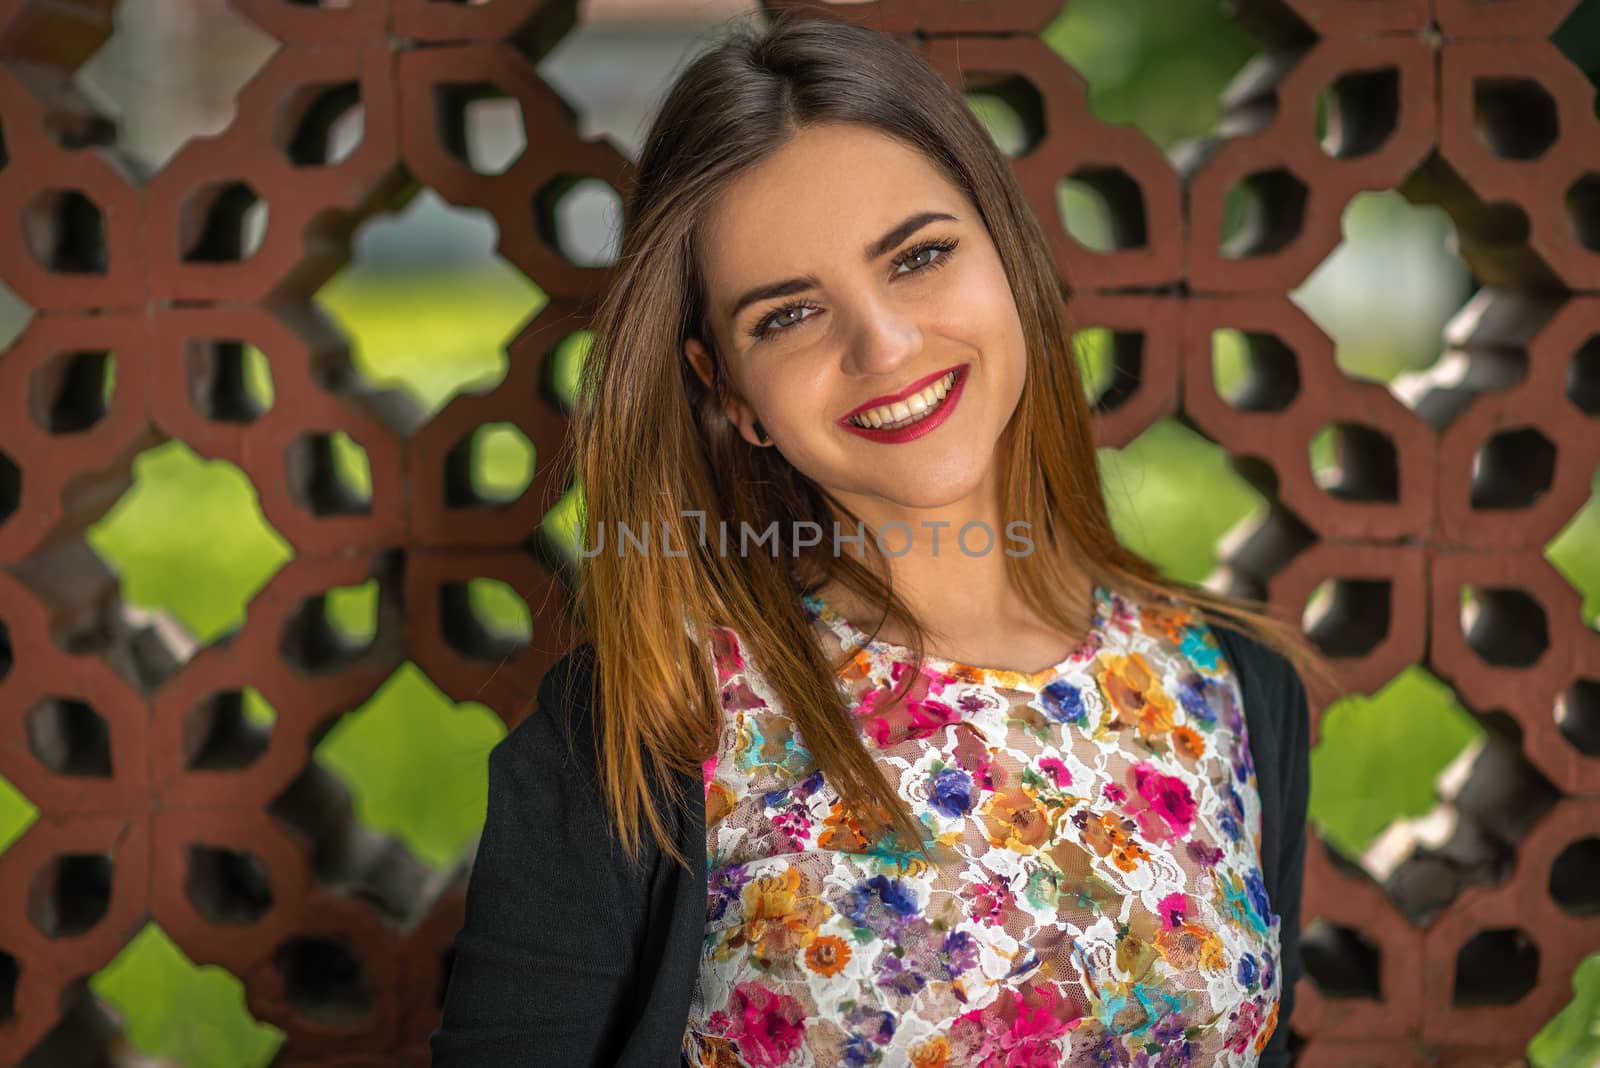 Portrait of a beautiful young woman with big smile, bright eyes and red lips against a fence made from ornamental bricks. Shallow depth of field.